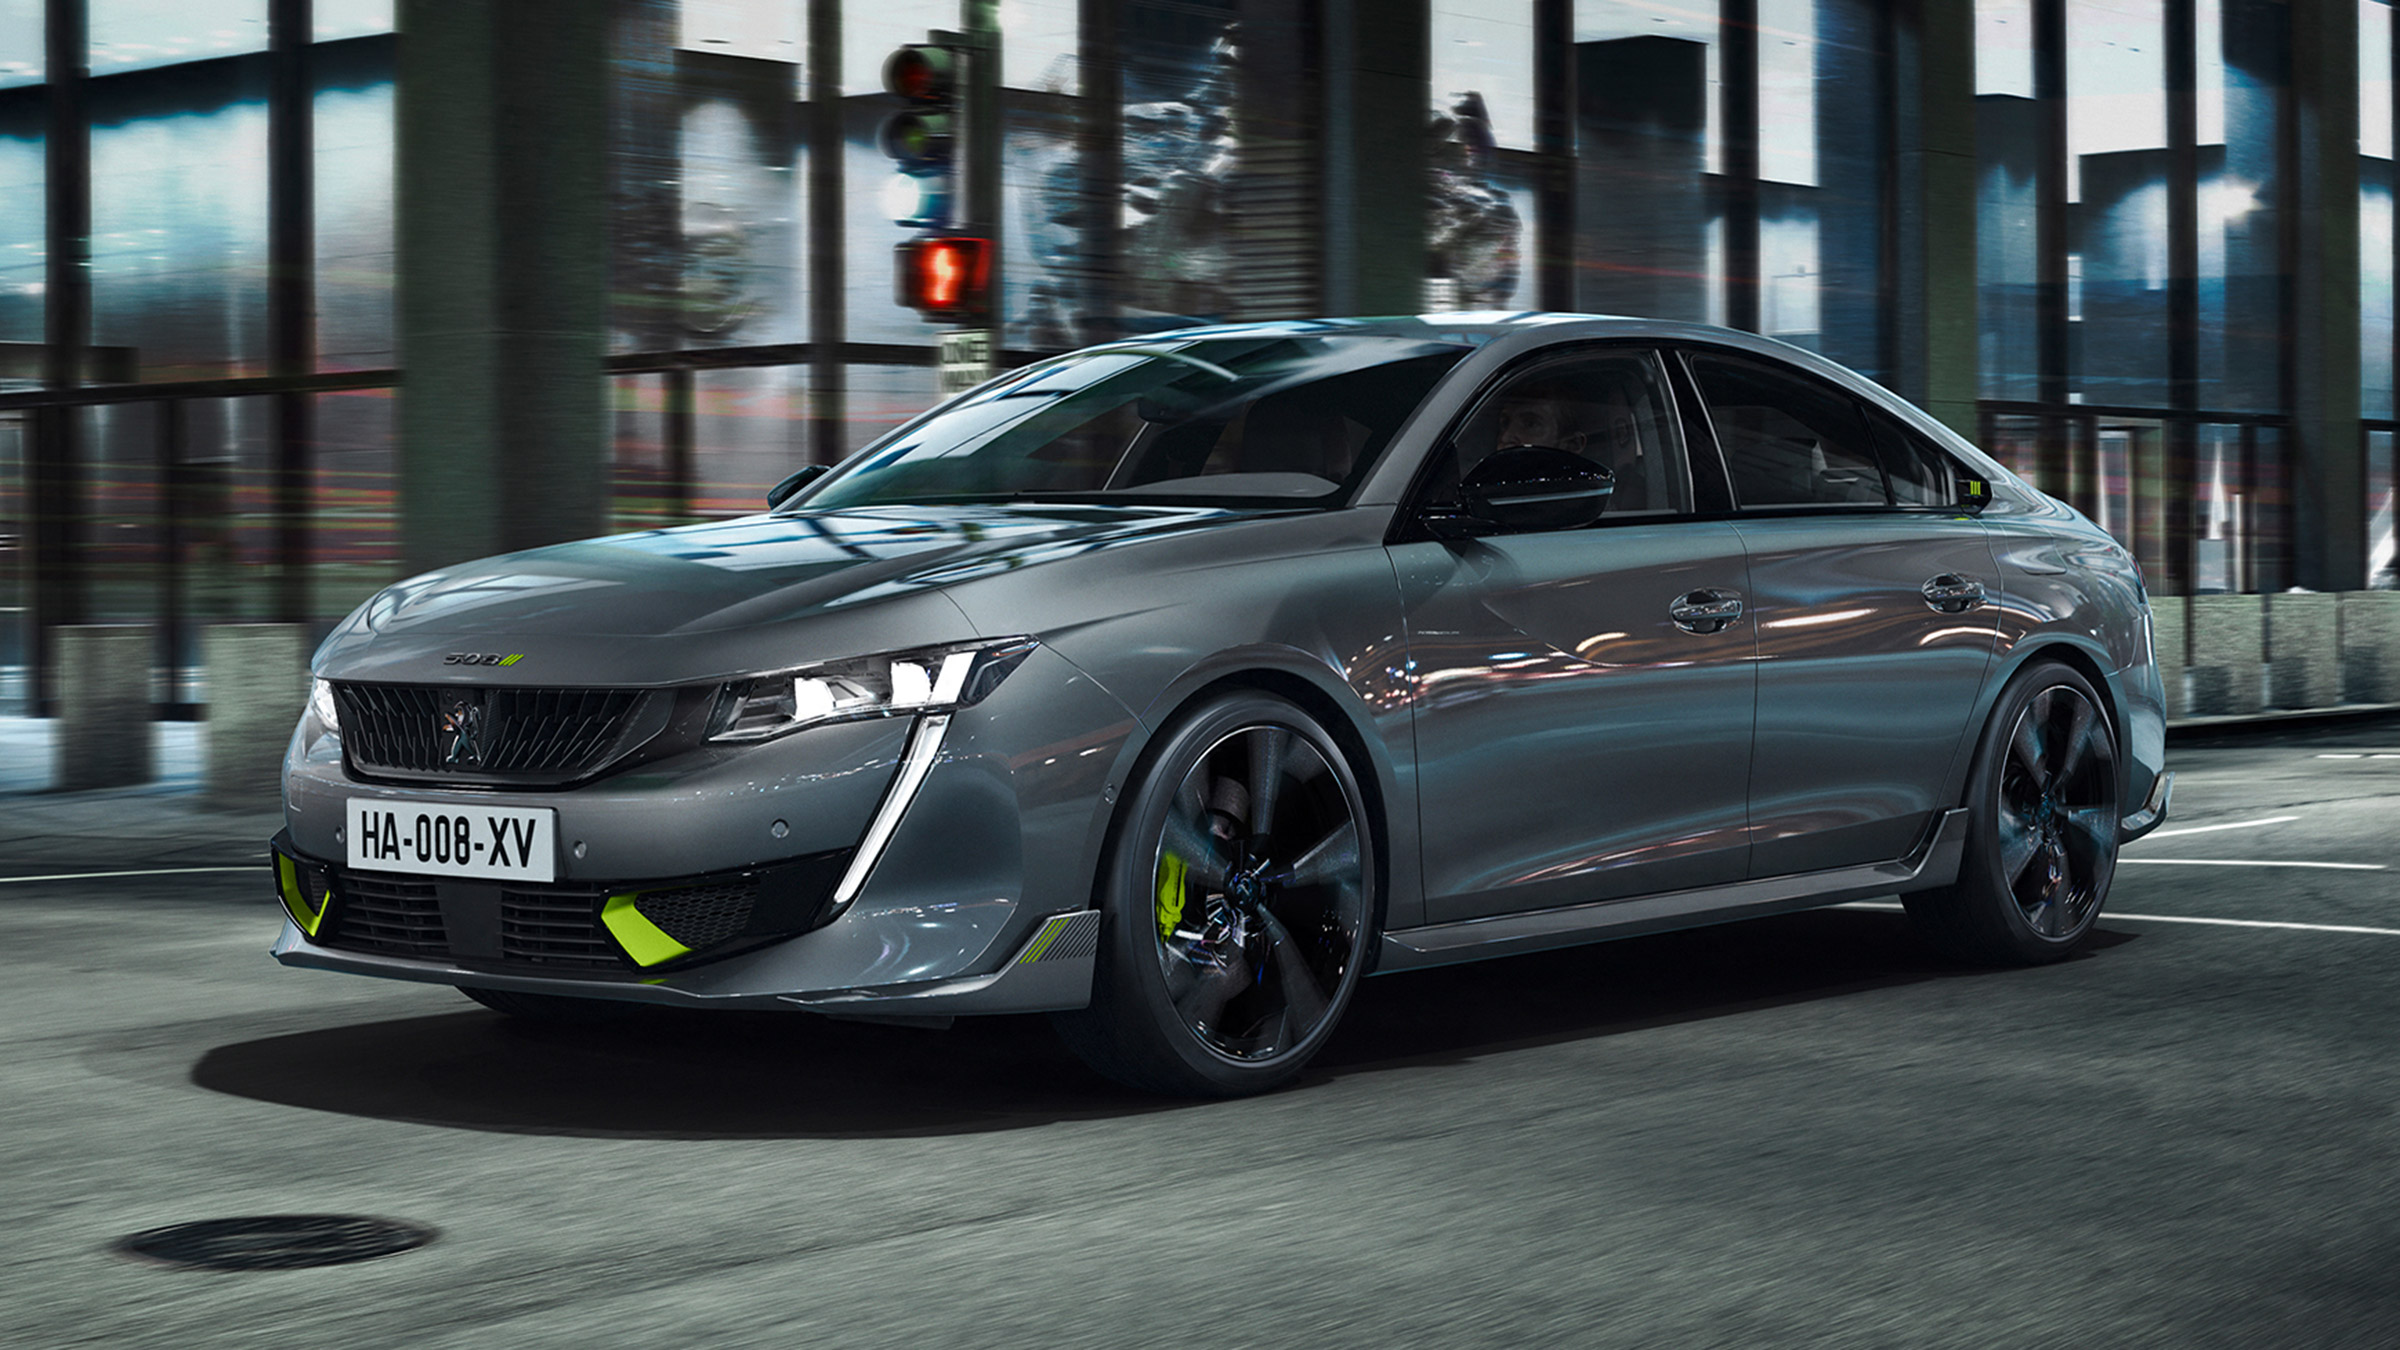 new-355bhp-peugeot-508-sport-engineered-revealed-as-most-powerful-road